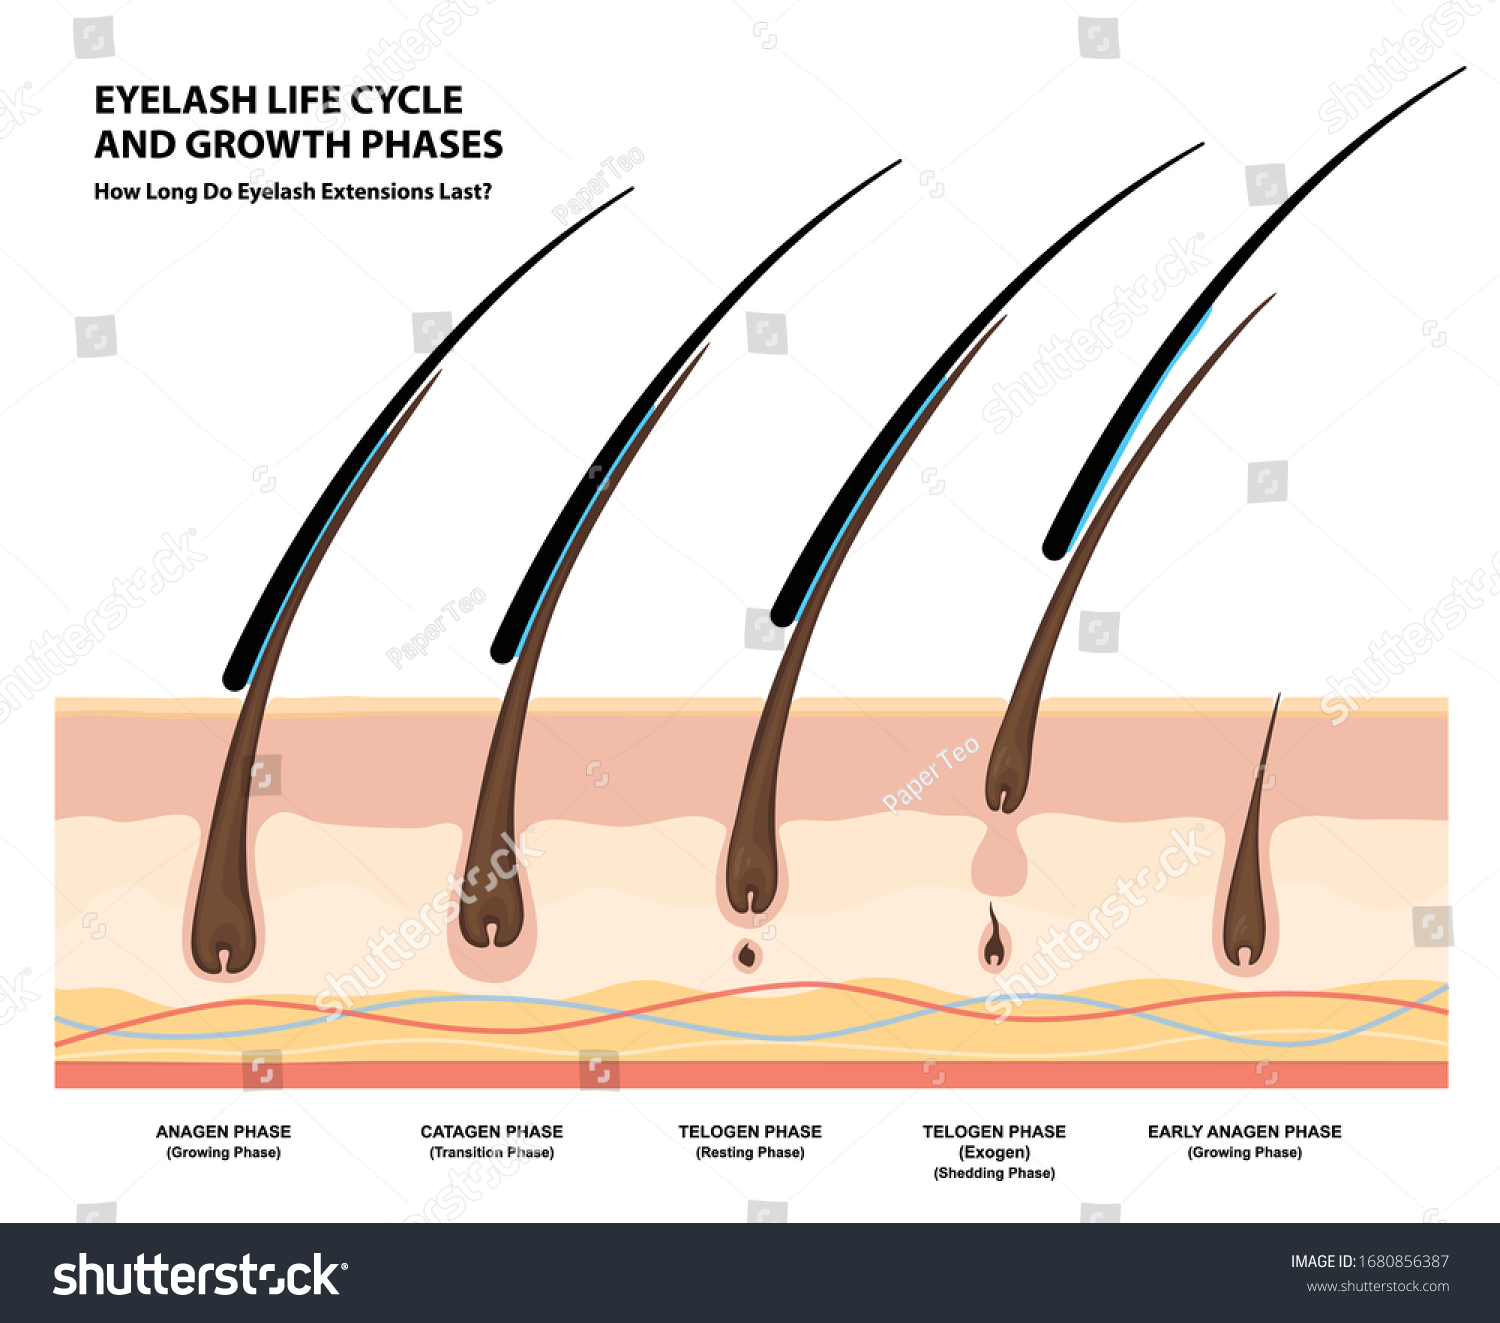 Eyelash Life Cycle and Growth Phases. How Long Do Eyelash Extensions Stay On. Macro, Selective Focus. Guide. Infographic Vector Illustration  #1680856387